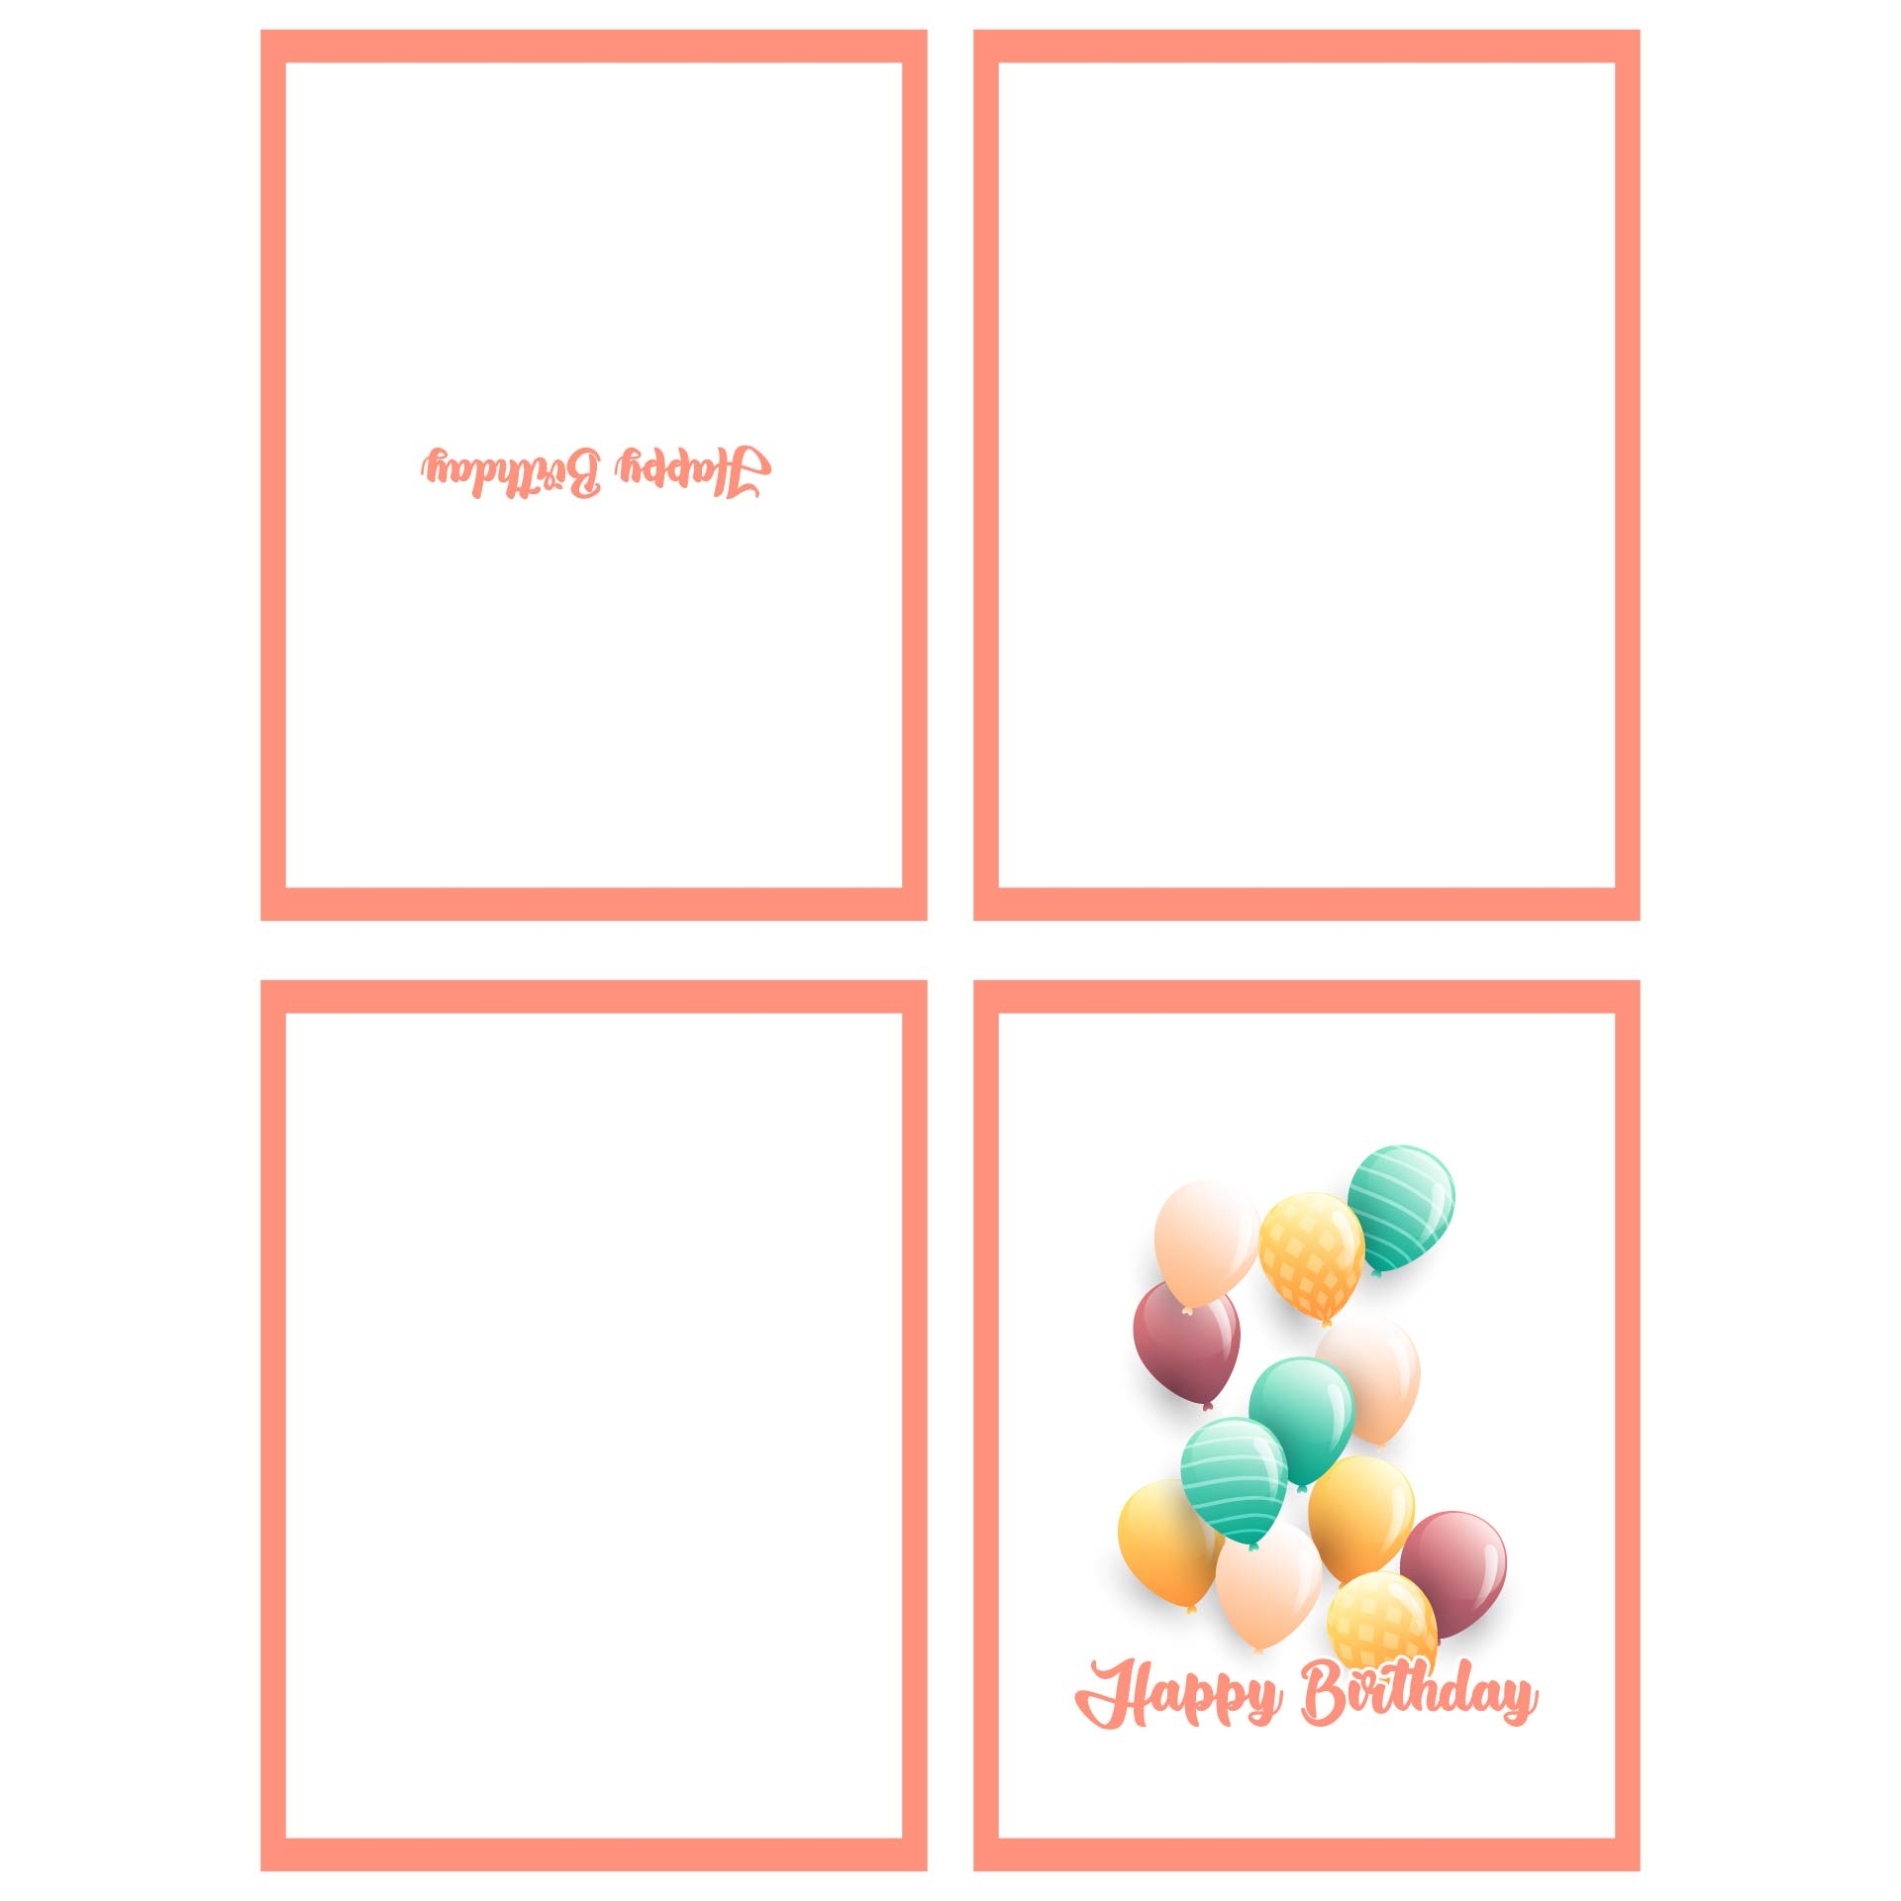 Quarter Fold Birthday Card Template Throughout Quarter Fold Birthday Card Template